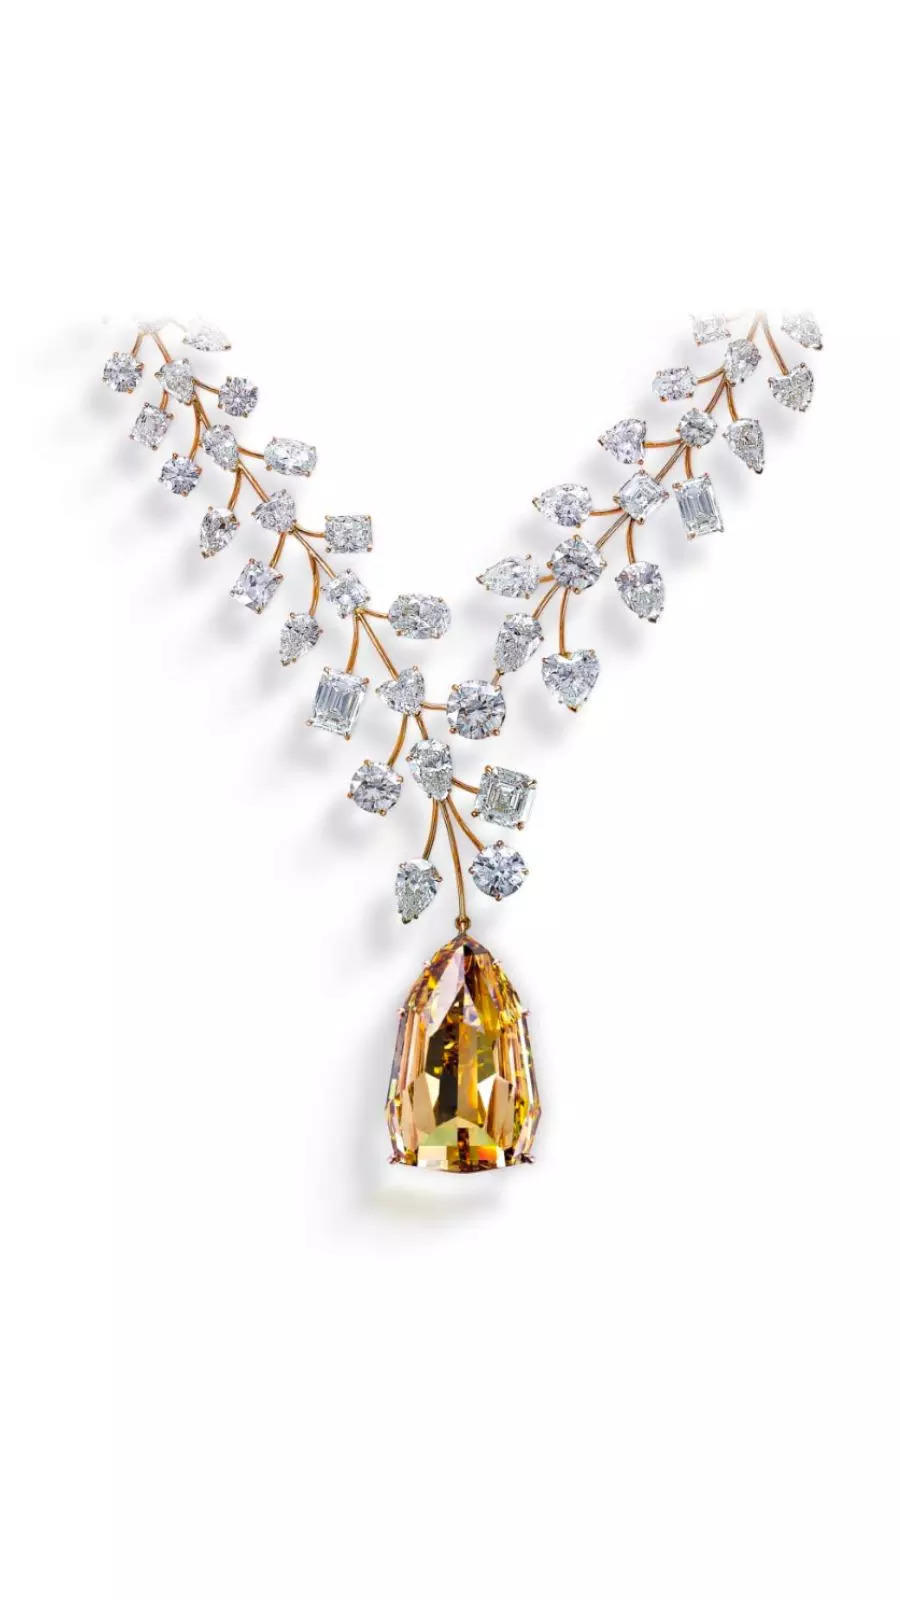 Diamond necklace displayed in media preview ahead of Singapore JewelFest -  Global Times